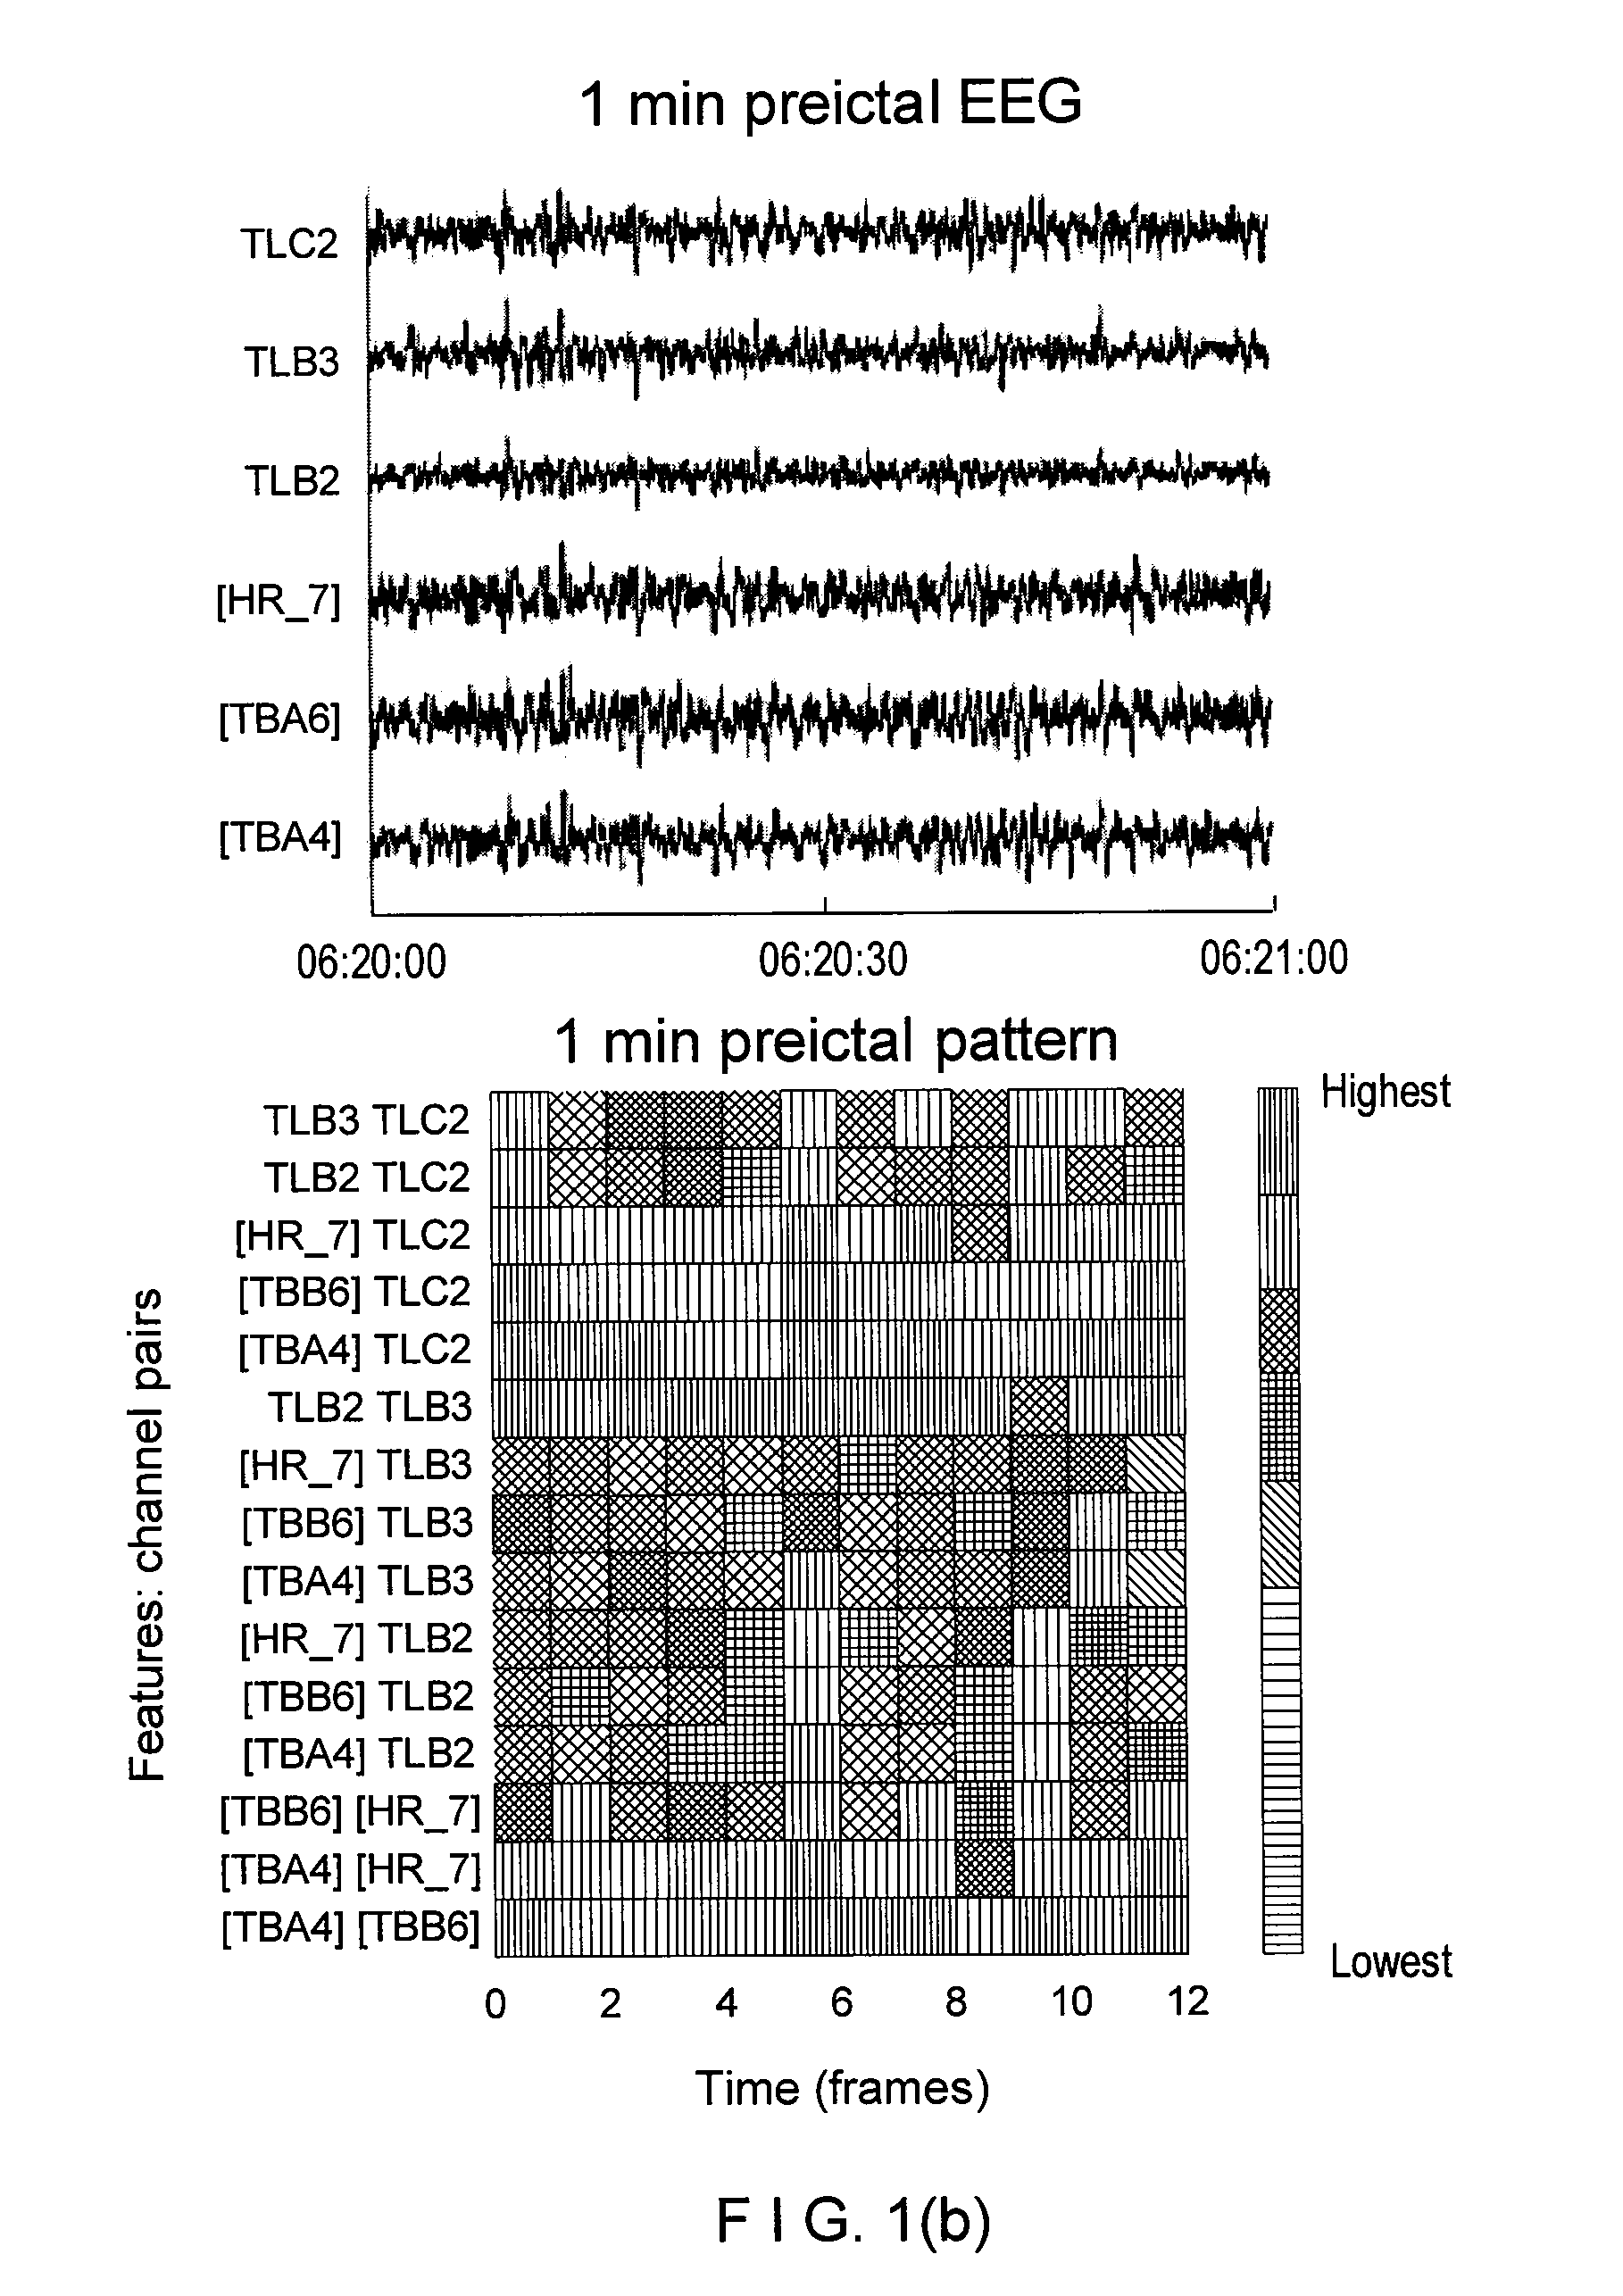 Method, system, and computer-accessible medium for classification of at least one ictal state